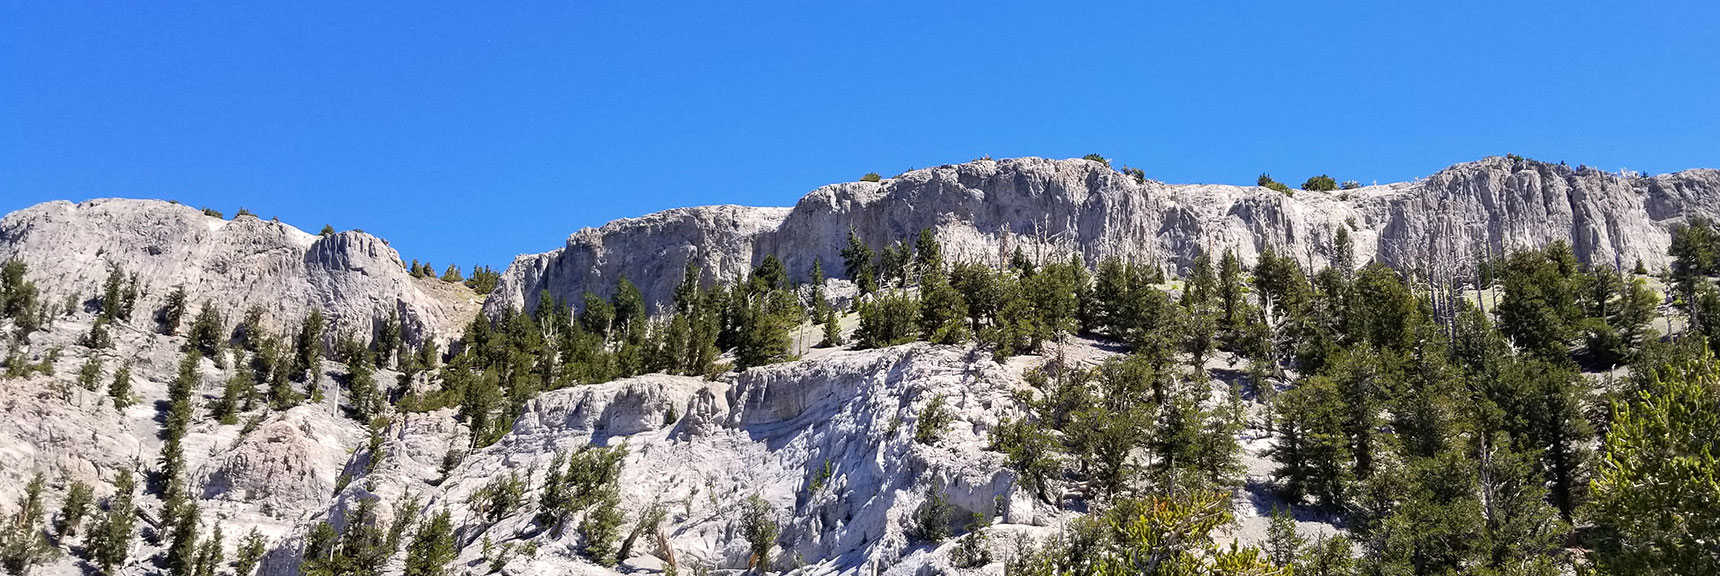 West Cliff of Mummy Mt, V-shaped Approach Canyon Visible in Mt Charleston Wilderness, Nevada